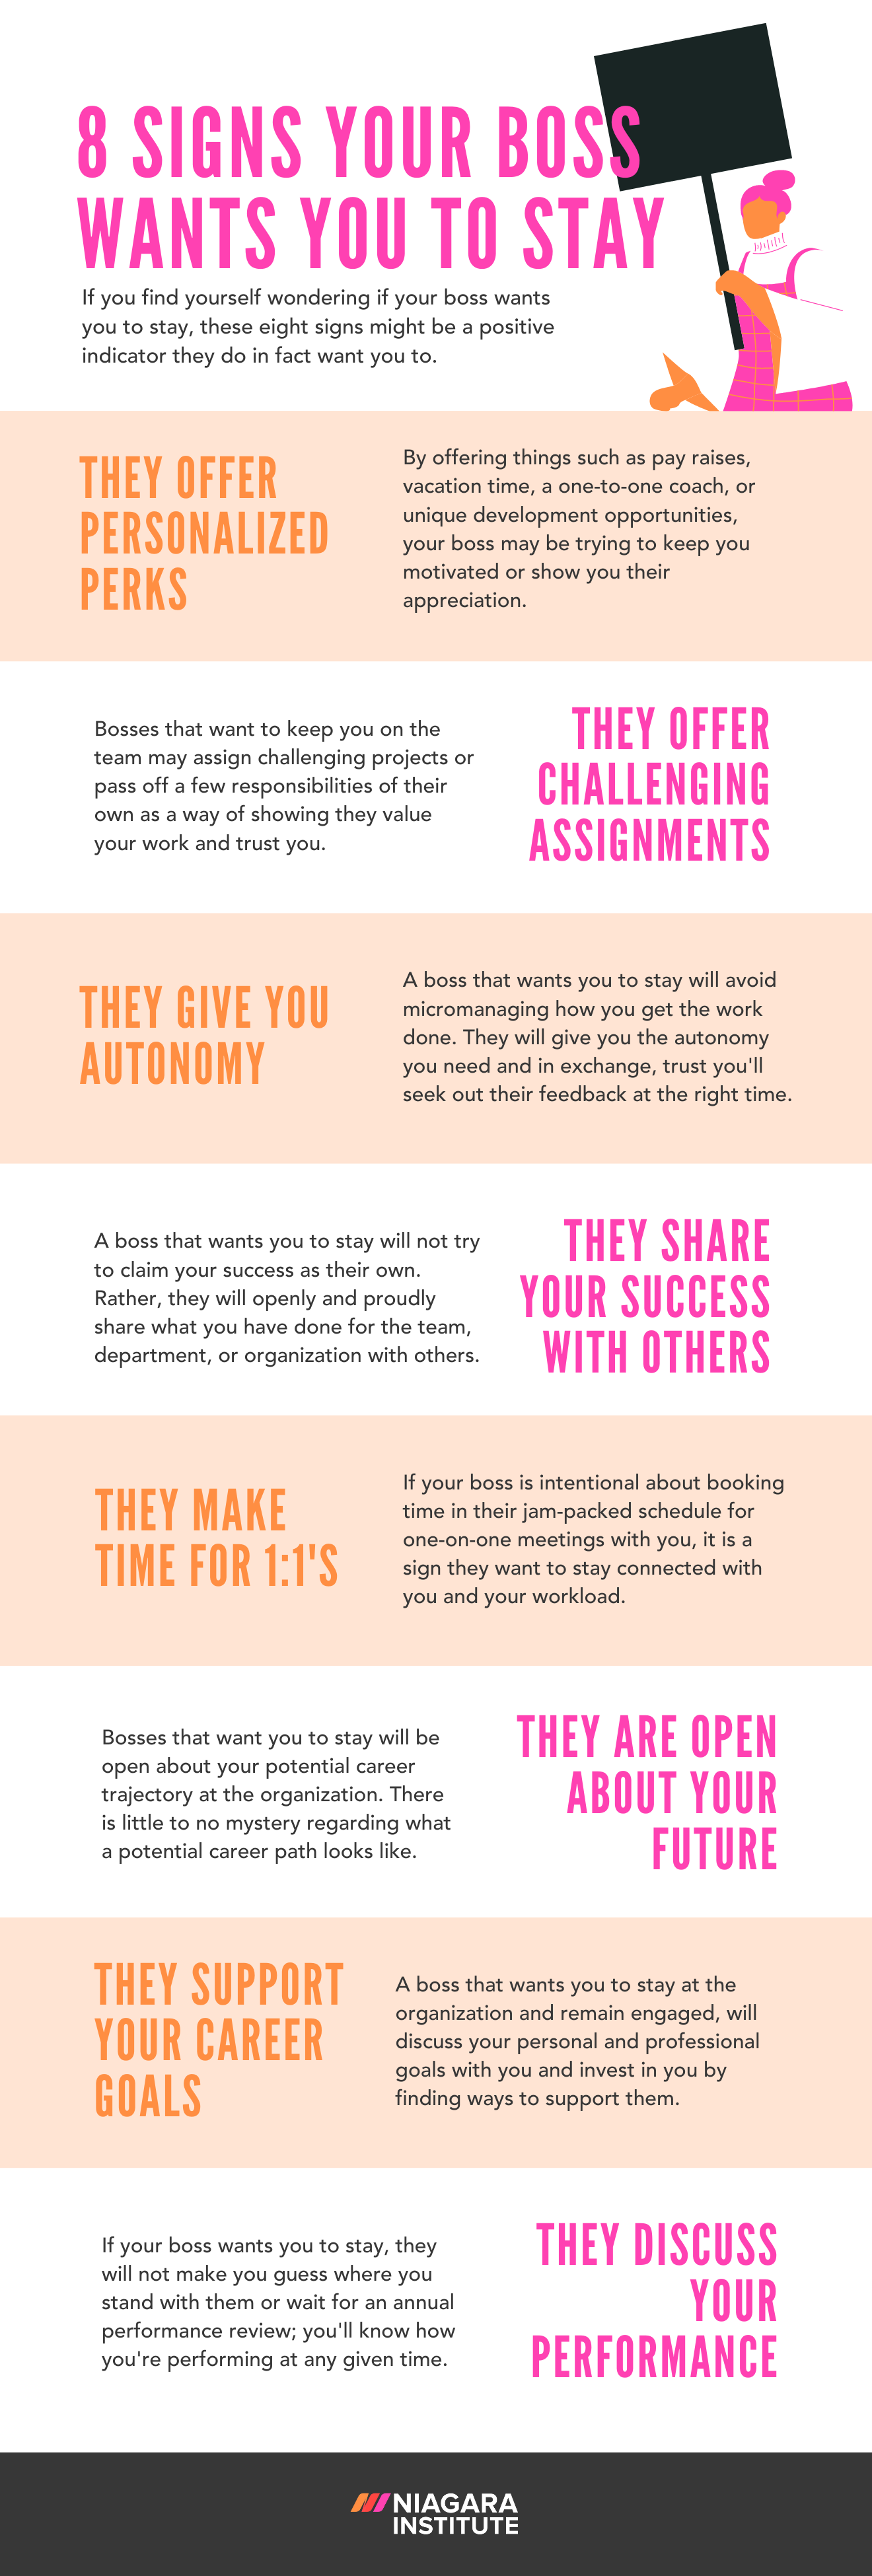 Infographic] 8 Signs Your Boss Wants You To Stay